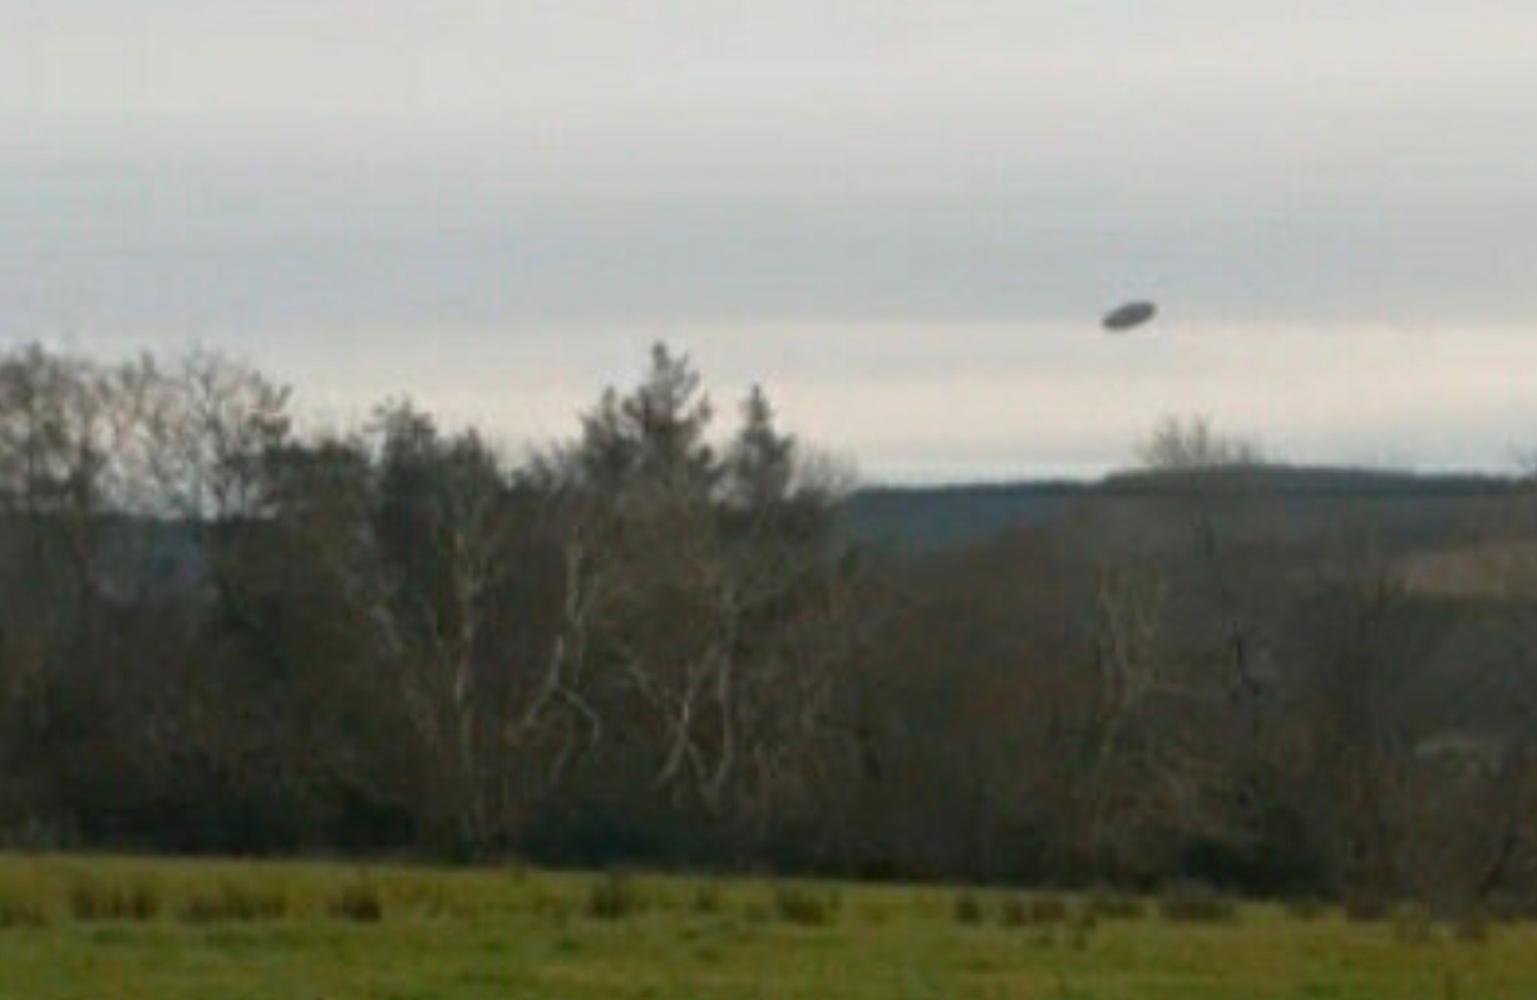 Irish politician witnessed the appearance of a UFO